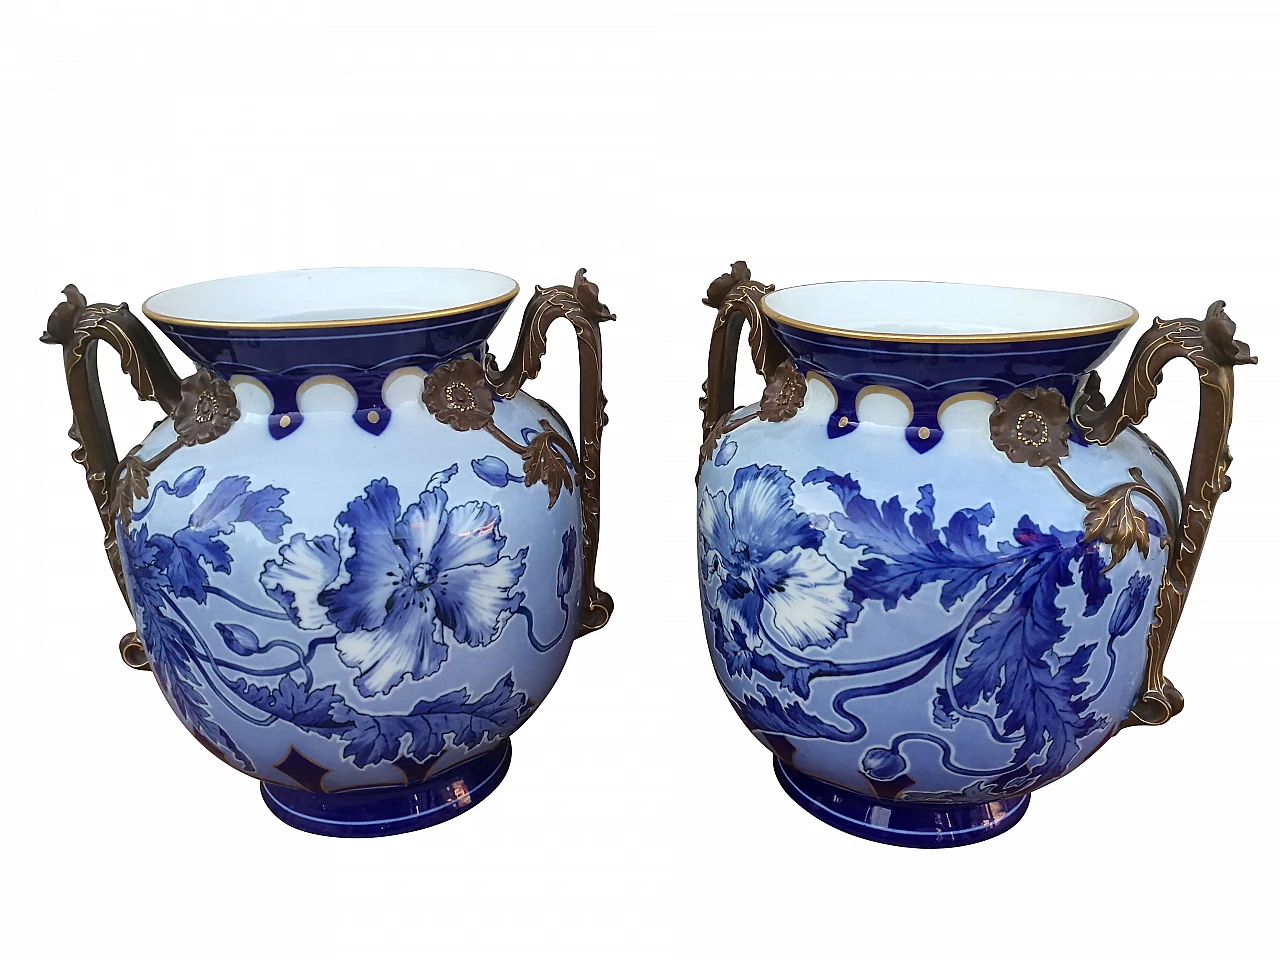 Pair of Jugendstil vases by Fischer & Mieg for Pirkenhammer, early 20th century 1253015